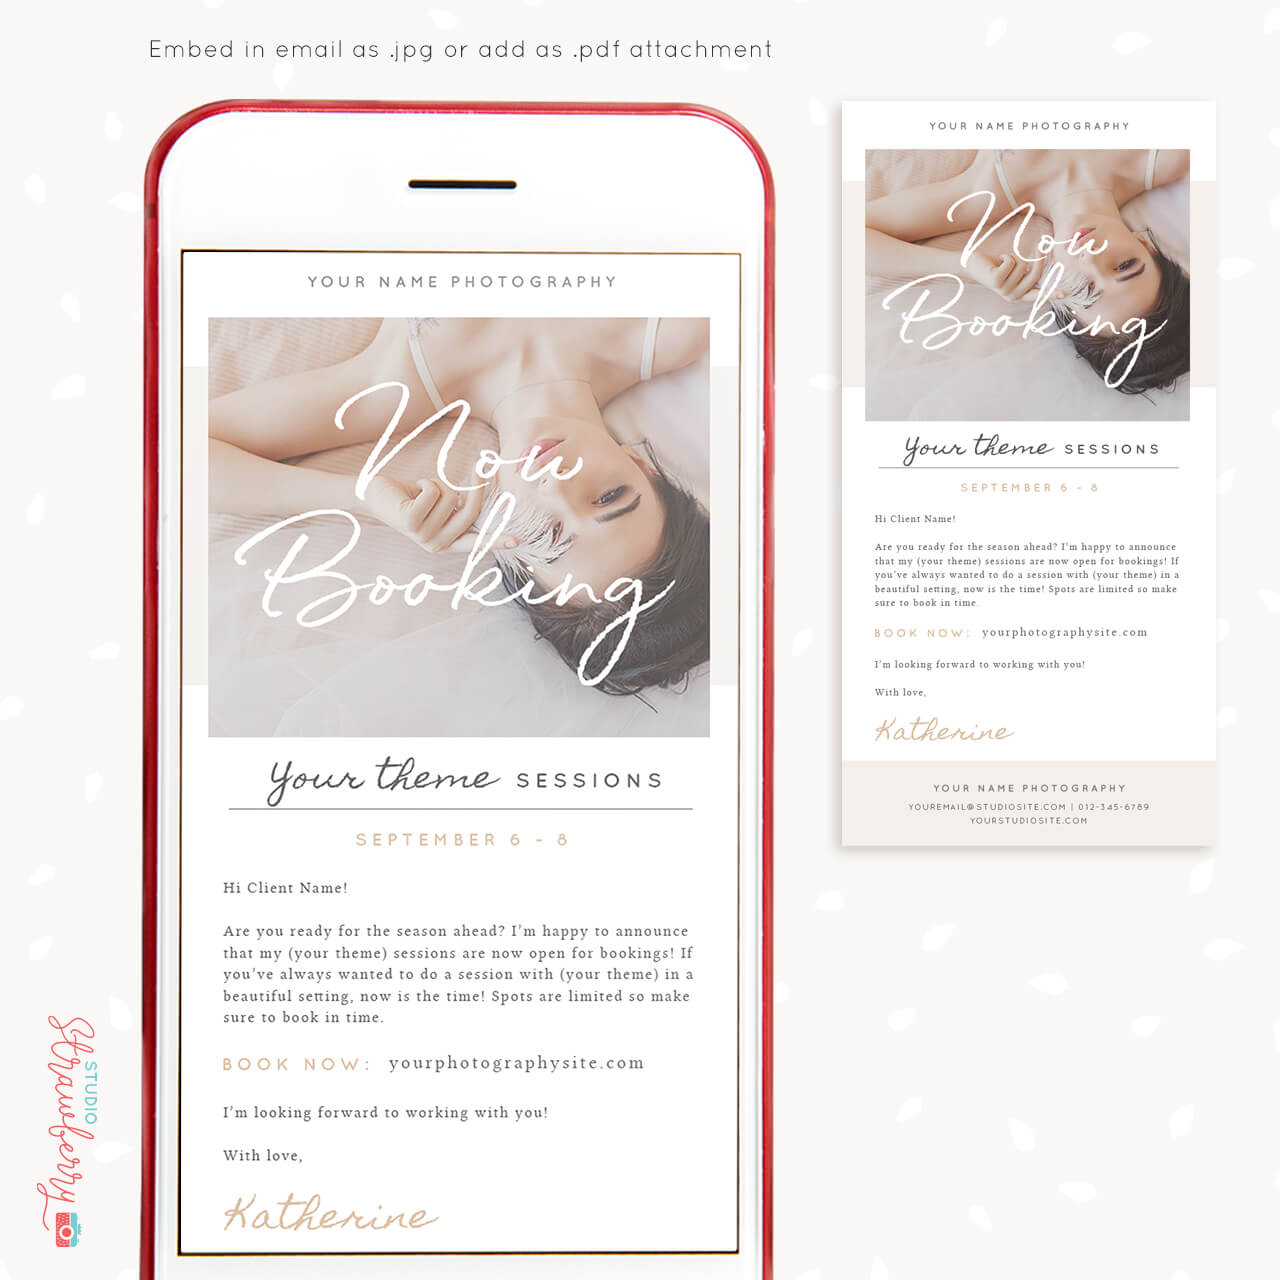 Now booking email template photographers